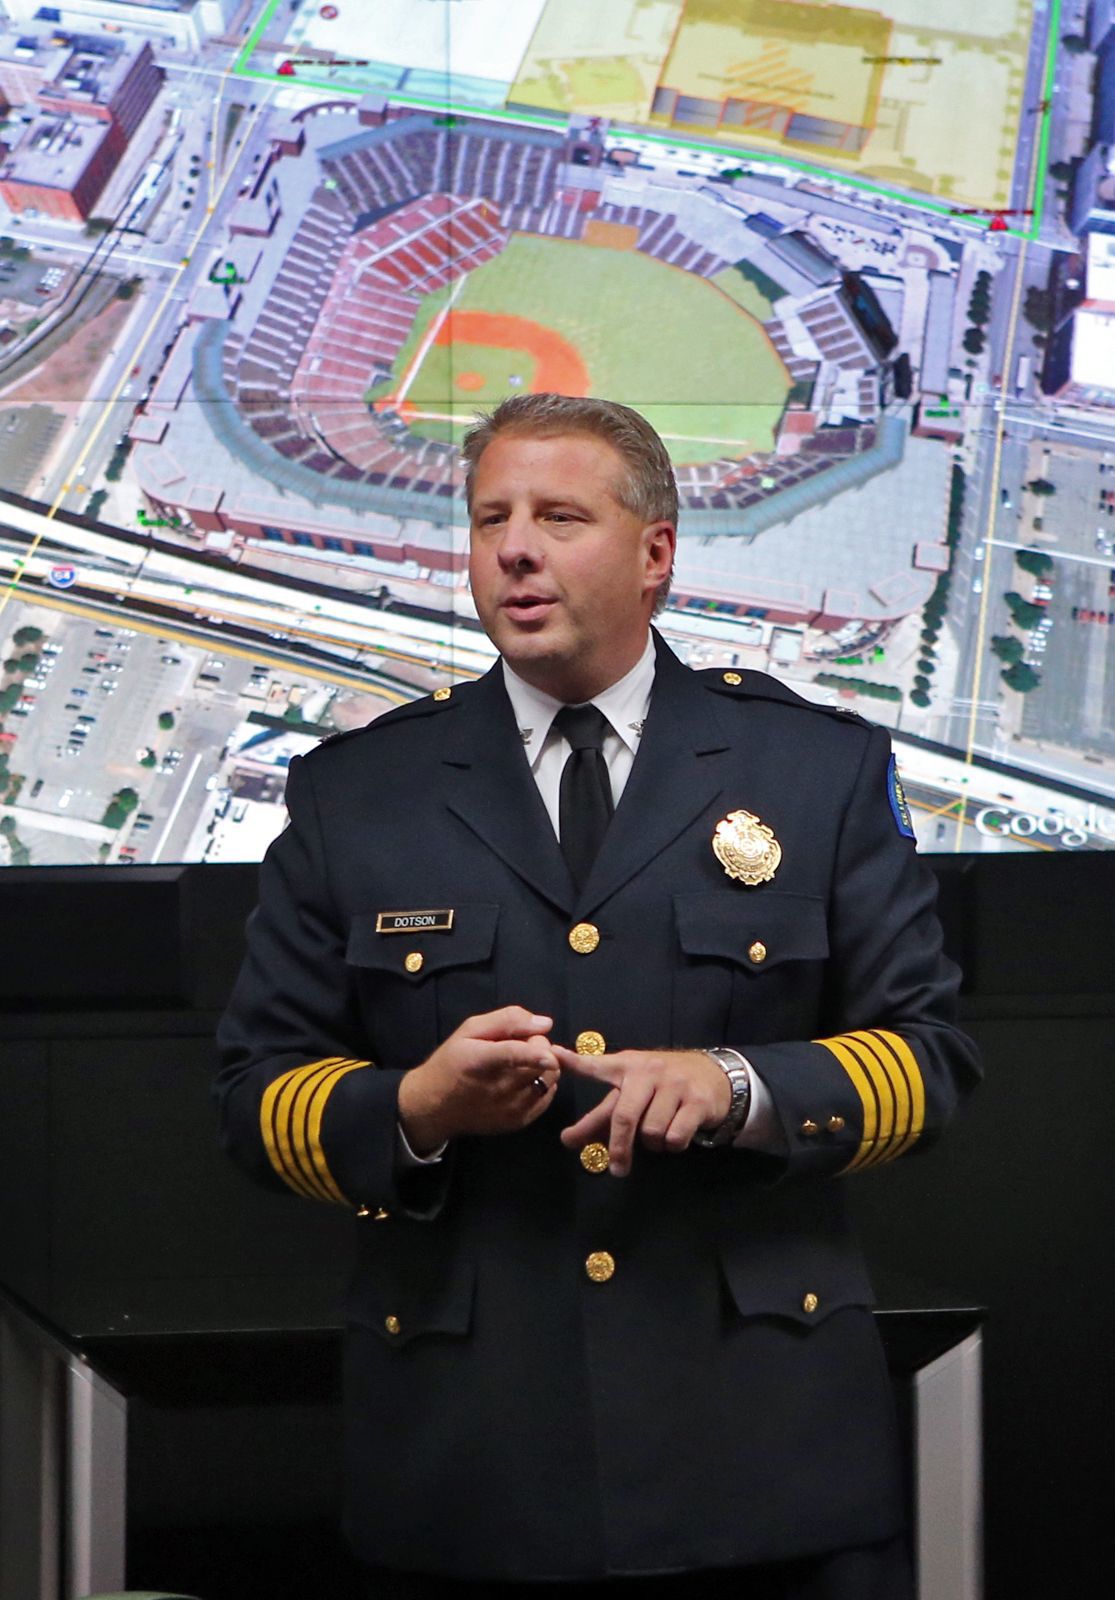 Former St. Louis police chief lands job with Washington Nationals | Law and order | www.strongerinc.org